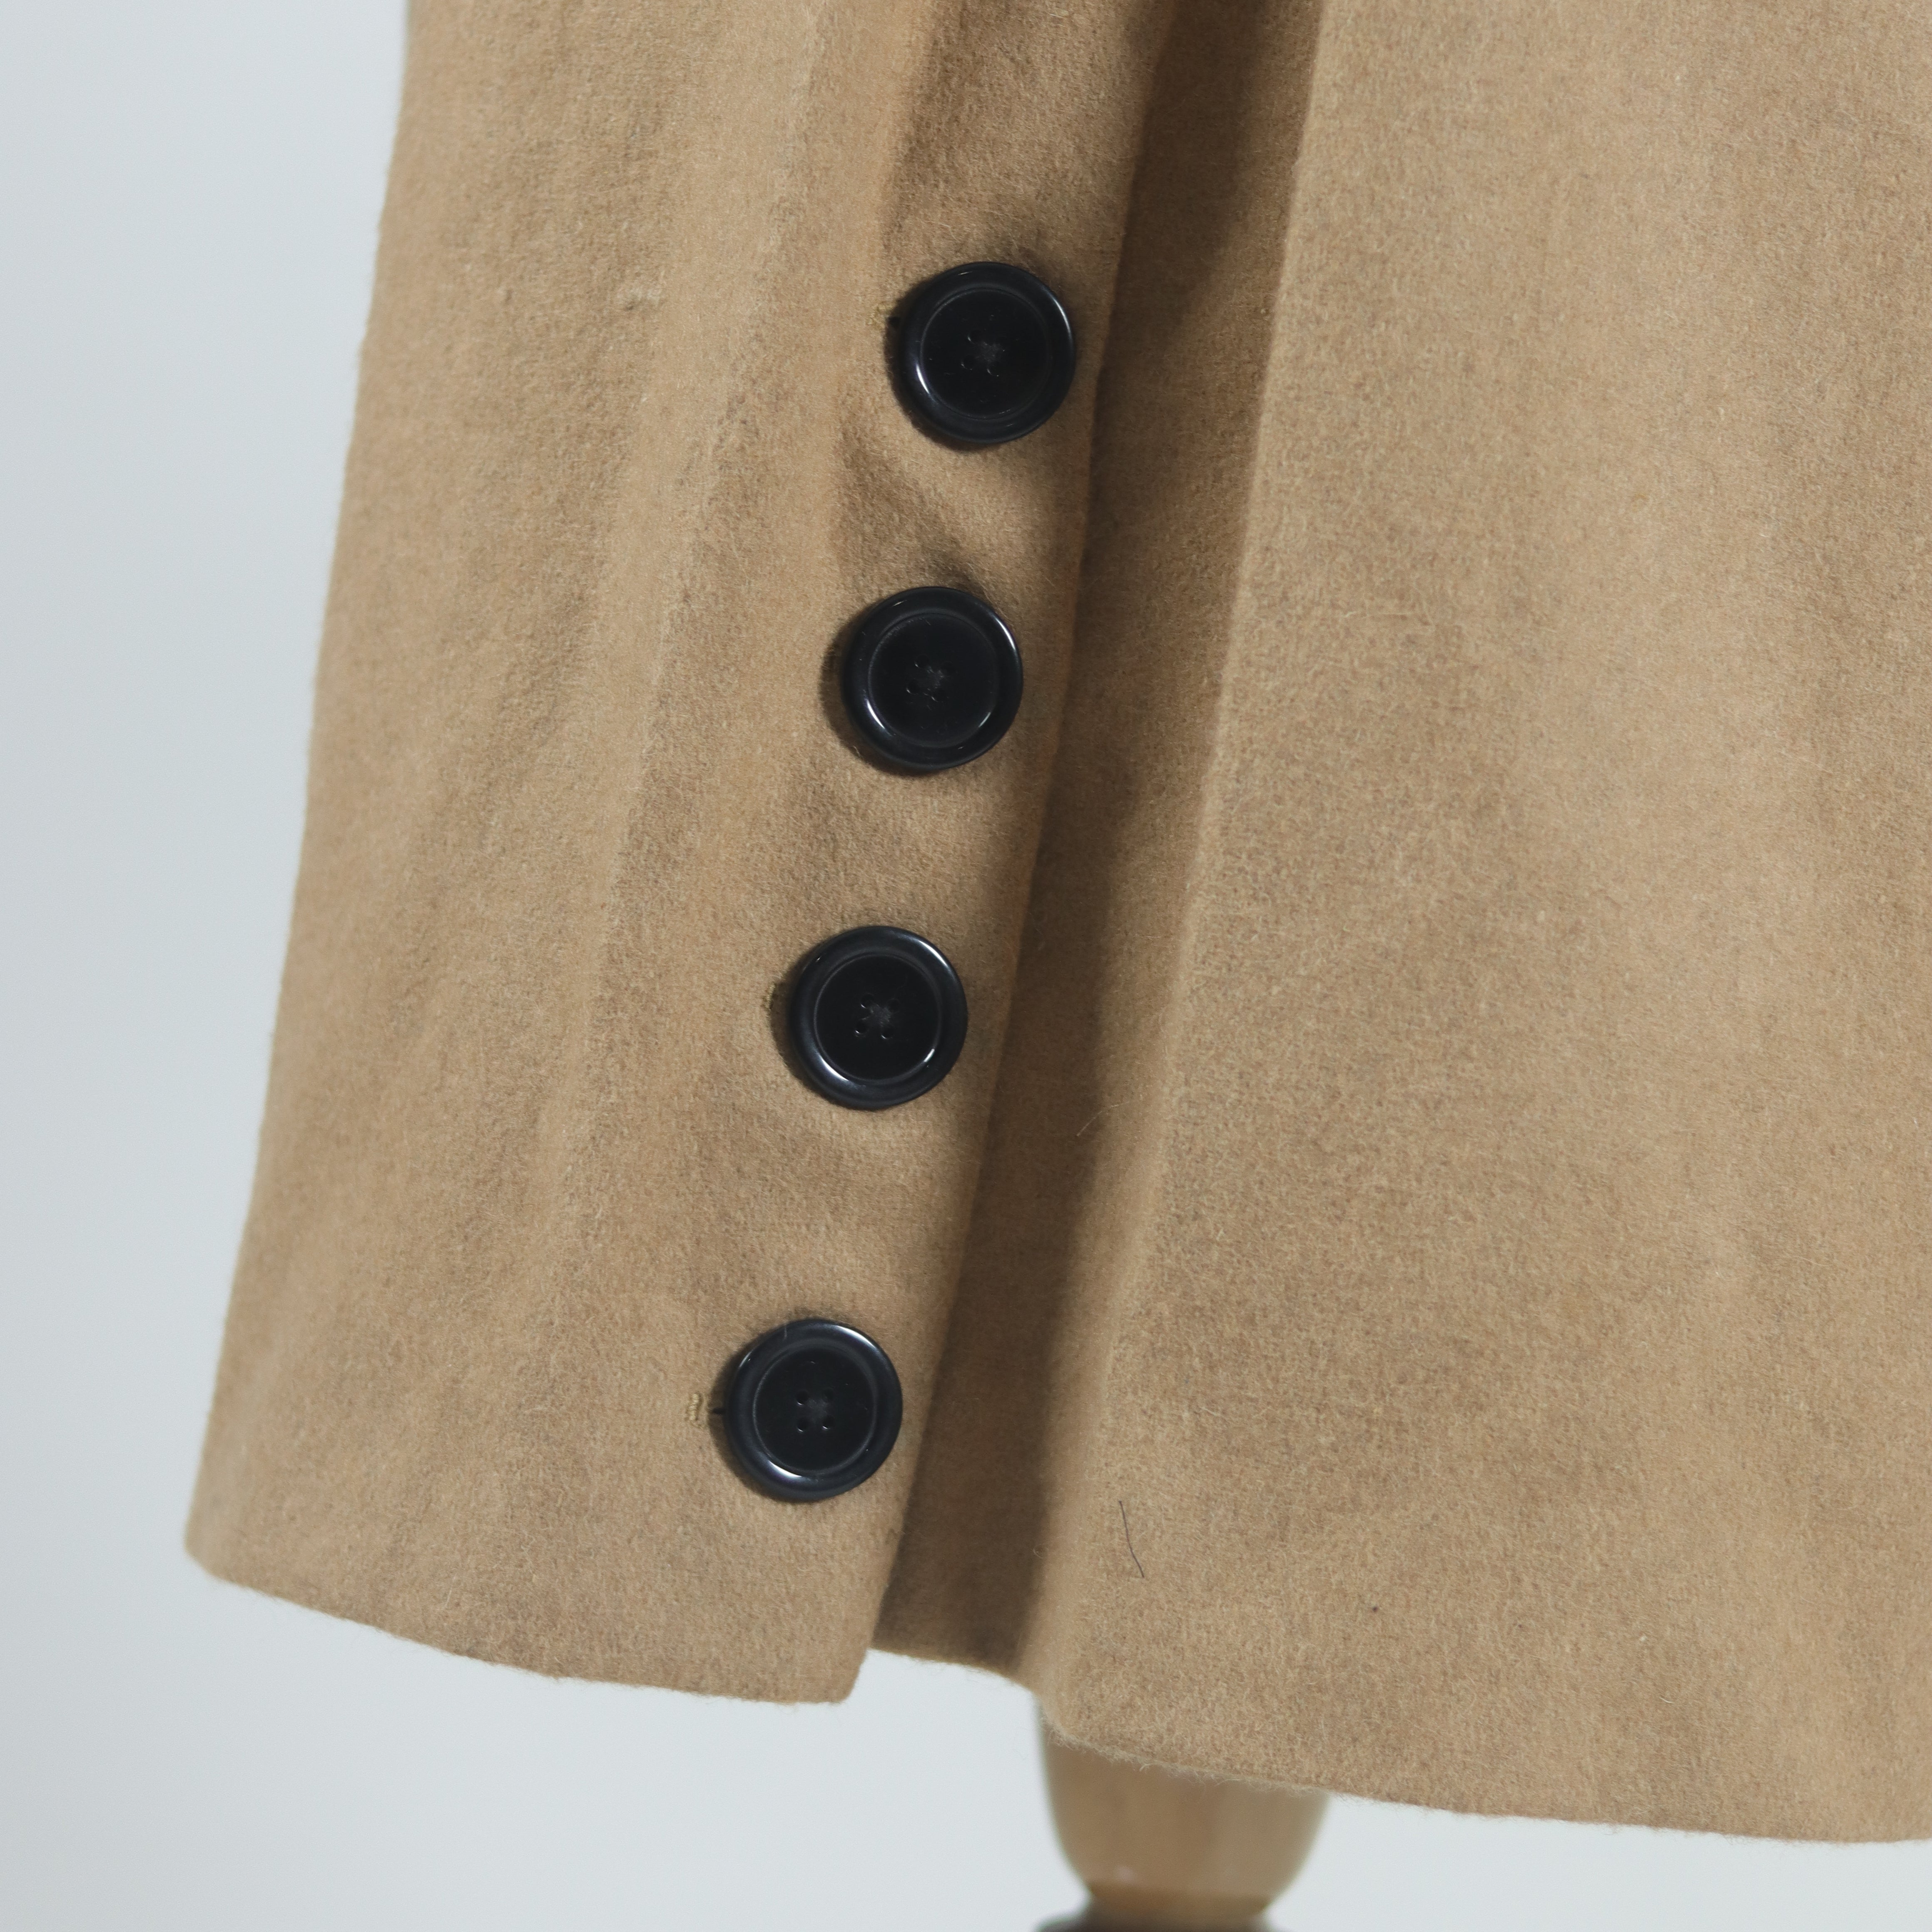 Business Almond Trench Coat